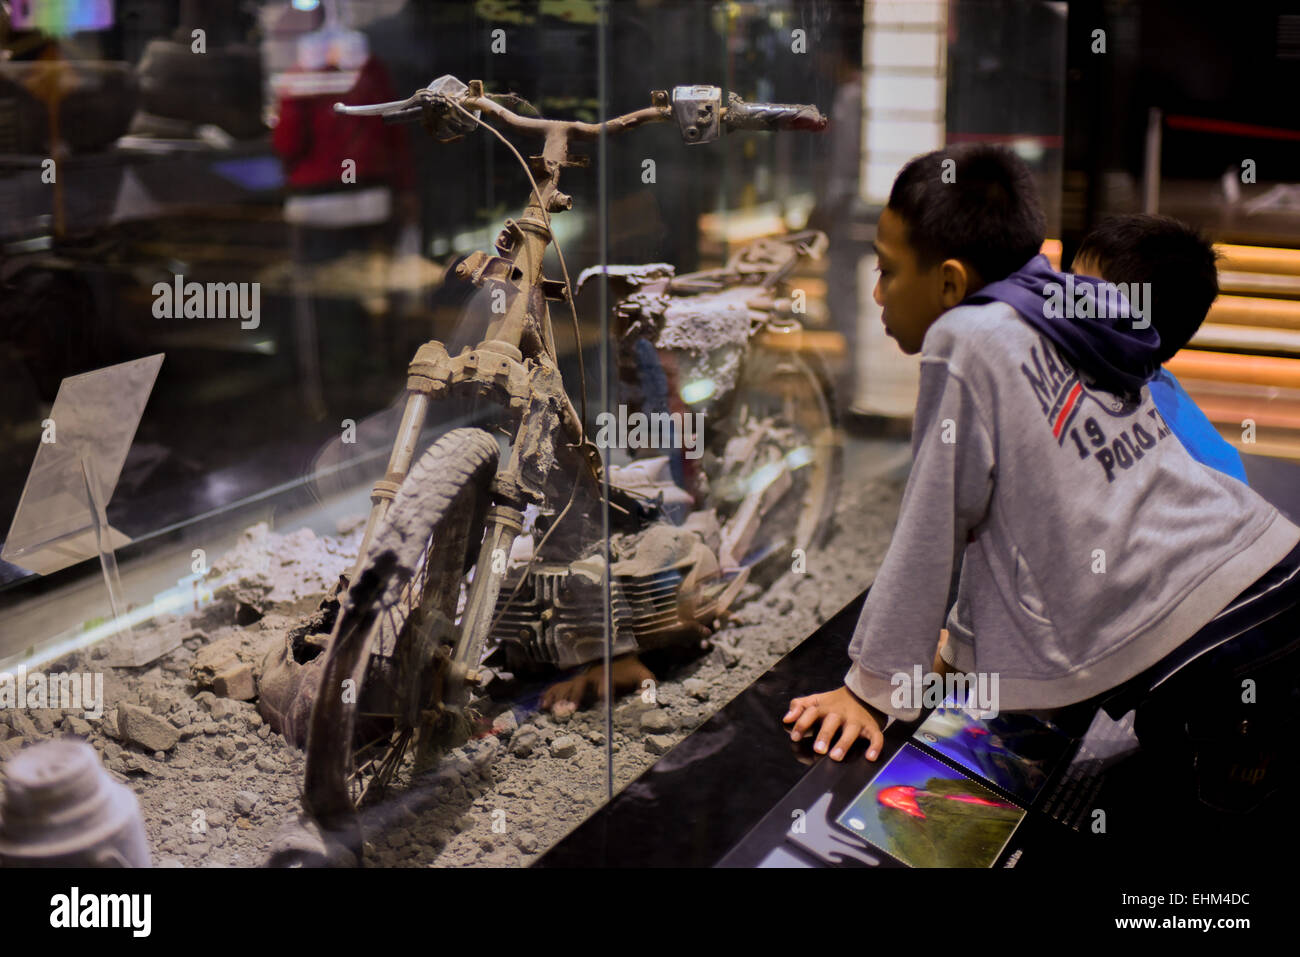 Bandung, Indonesia. 15th Mar, 2015. Children observe a damaged motorcycle hit by pyroclastic flows, at Geology Museum, Bandung, Indonesia. The artifact was taken from 2010 Mount Merapi eruption site in Yogyakarta province. Stock Photo